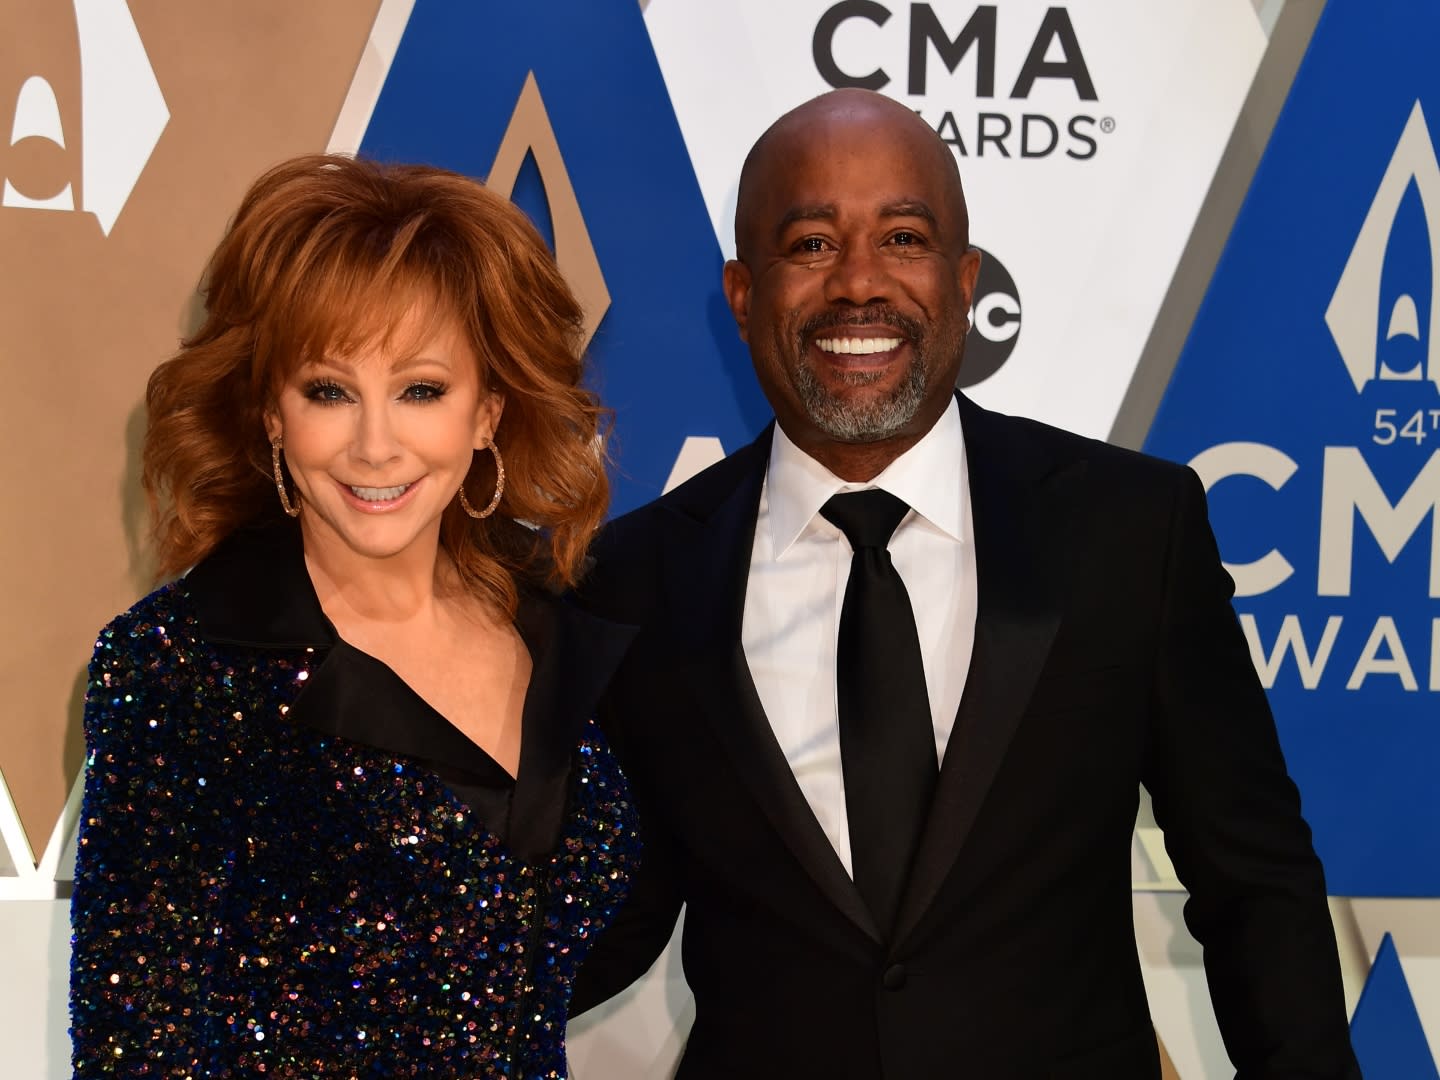 The Cma Awards Are Being Slammed As A Huge Covid 19 Superspreader Disaster